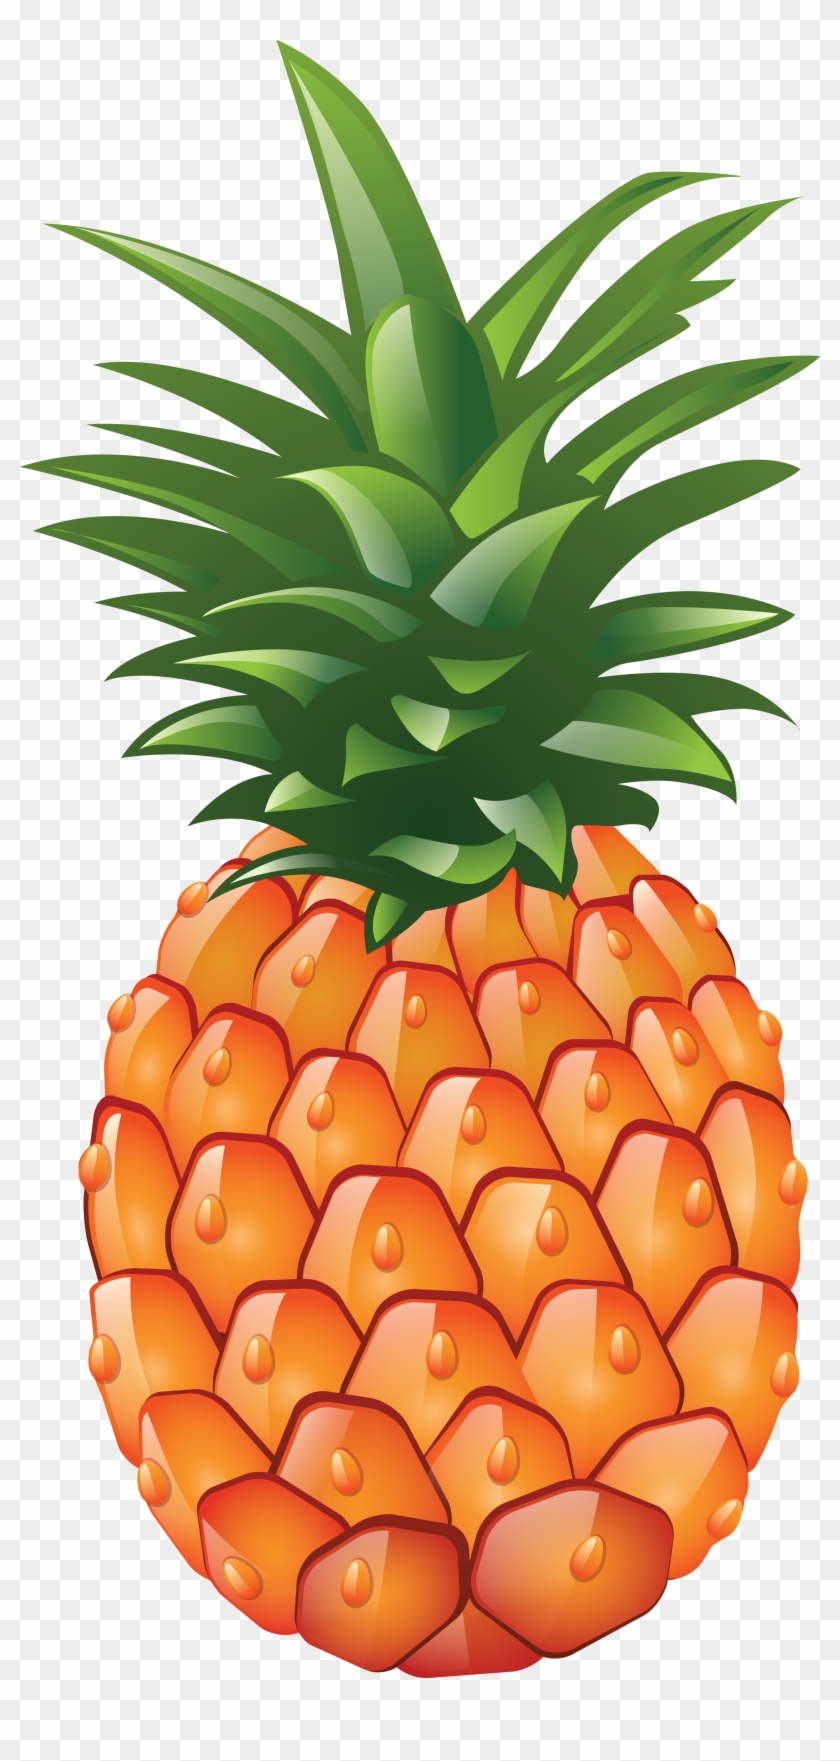 Cartoon Pineapple Cliparts - Pineapple Clipart Png #1082215